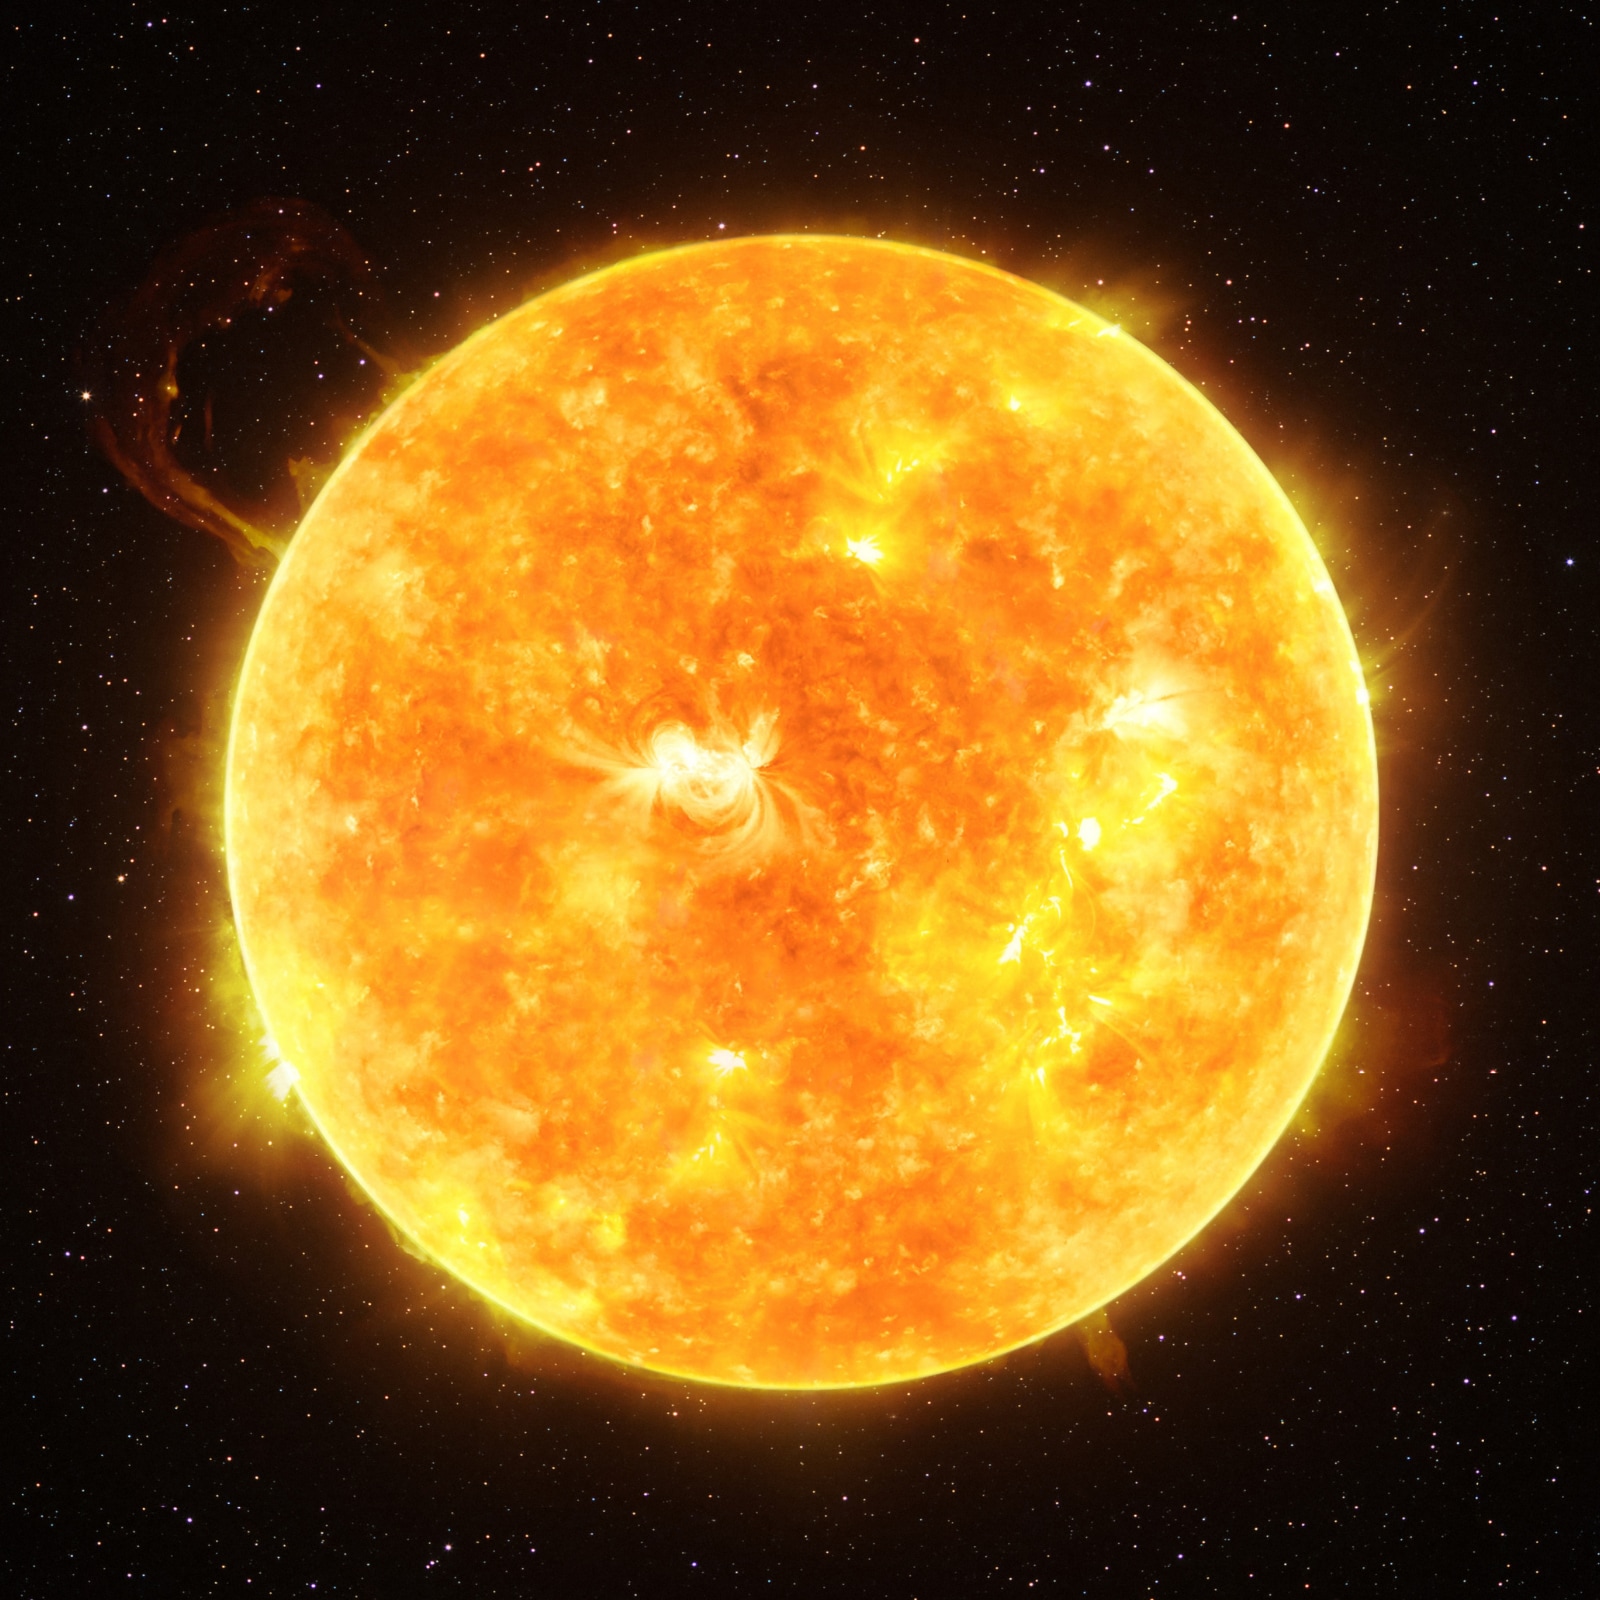 supergiant compared to sun